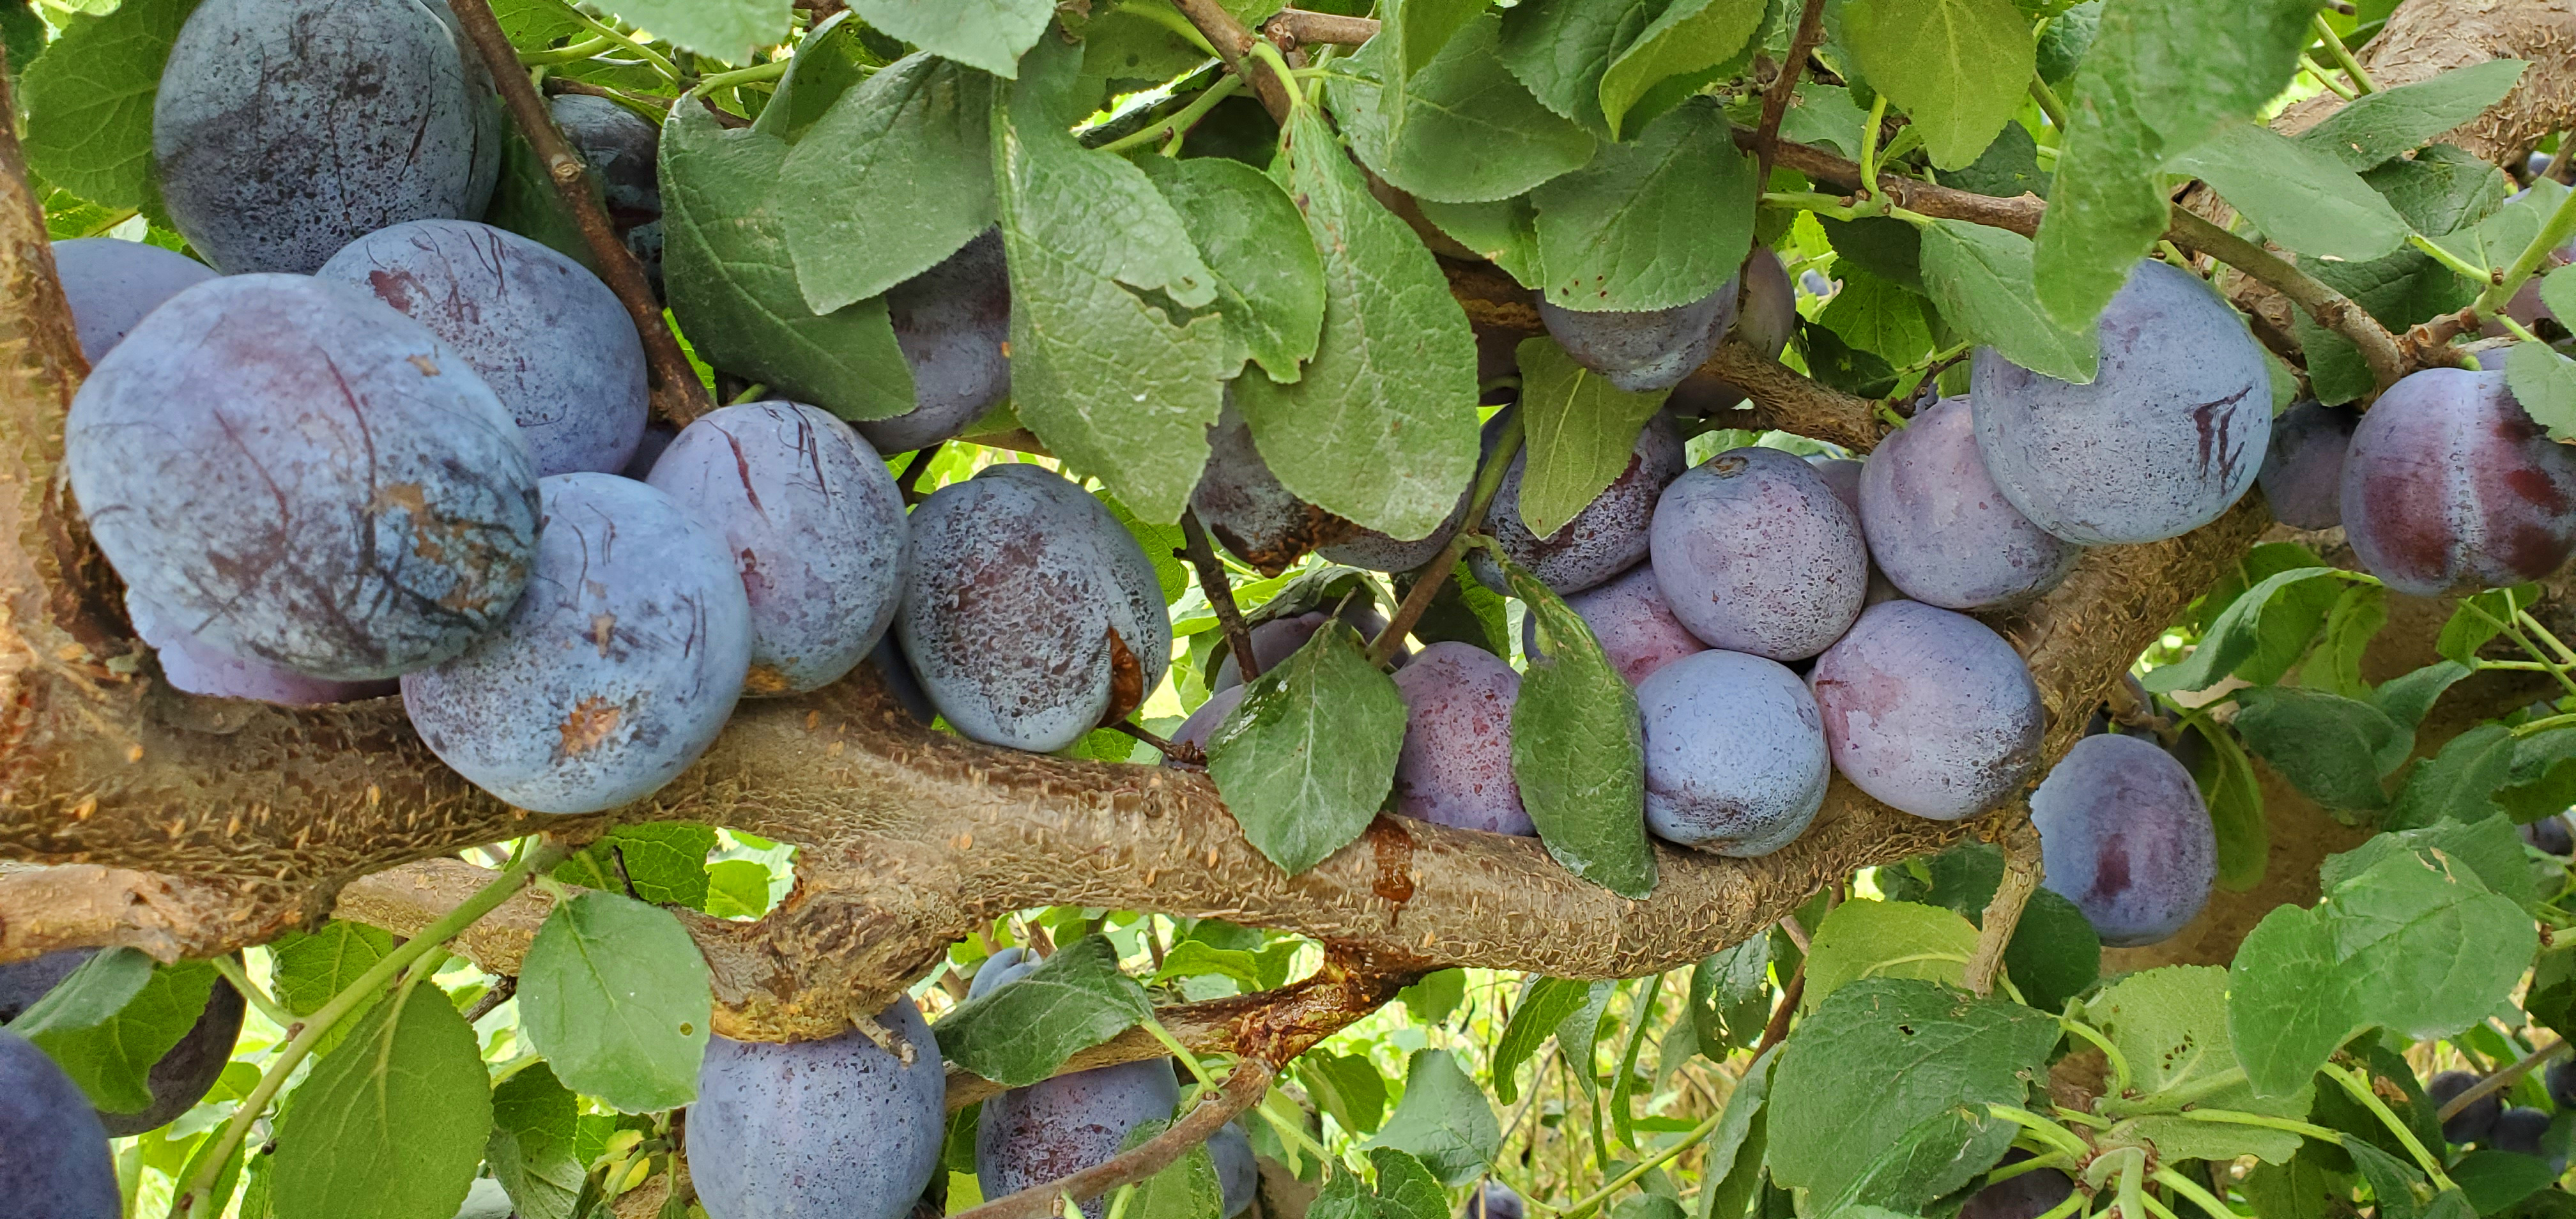 European plums hanging from tree.